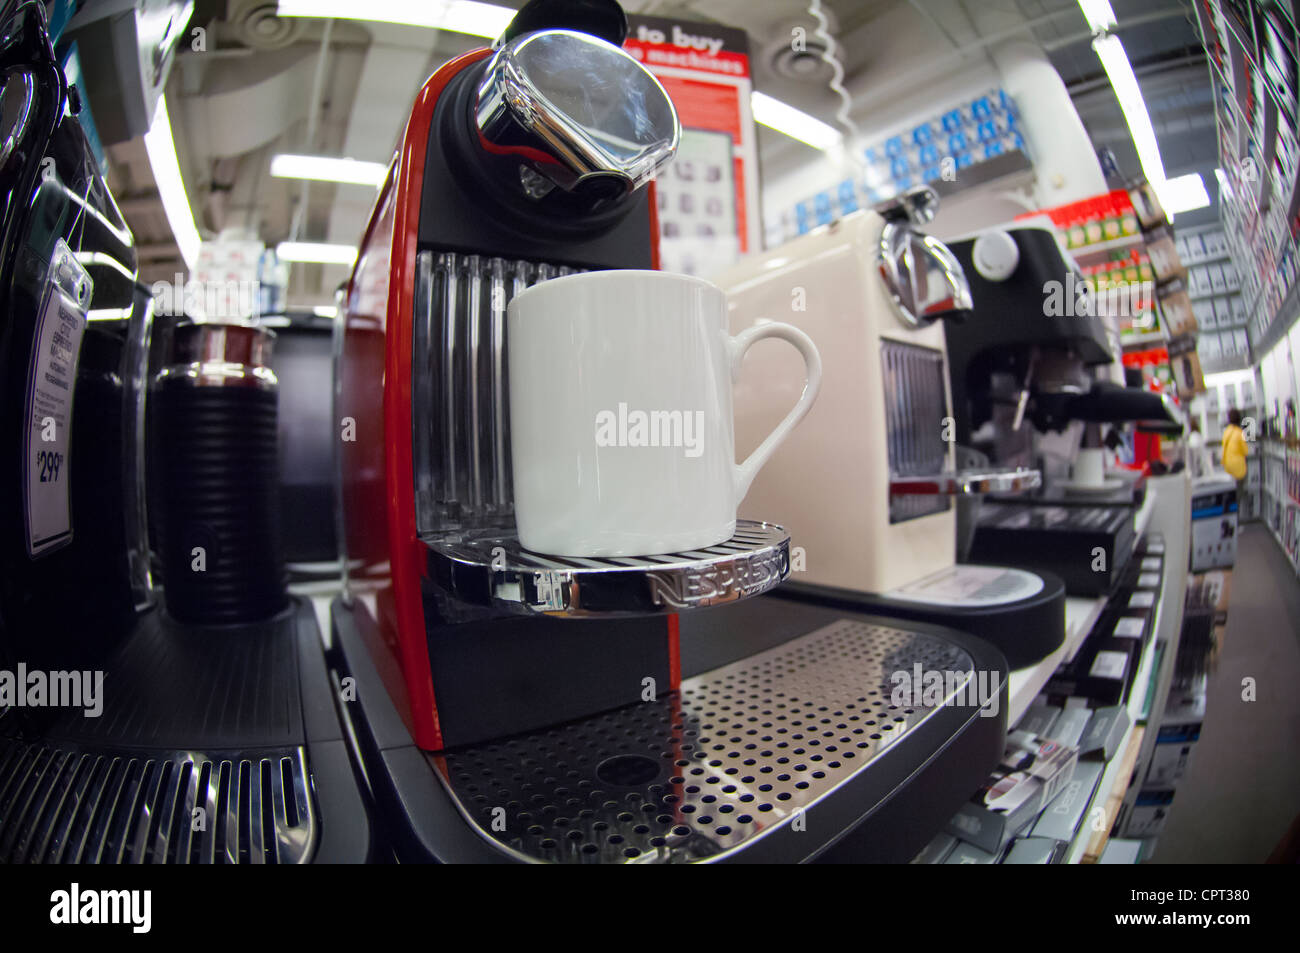 A Nespresso coffee maker is seen for sale in a Bed, Bath and Beyond store  in New York Stock Photo - Alamy